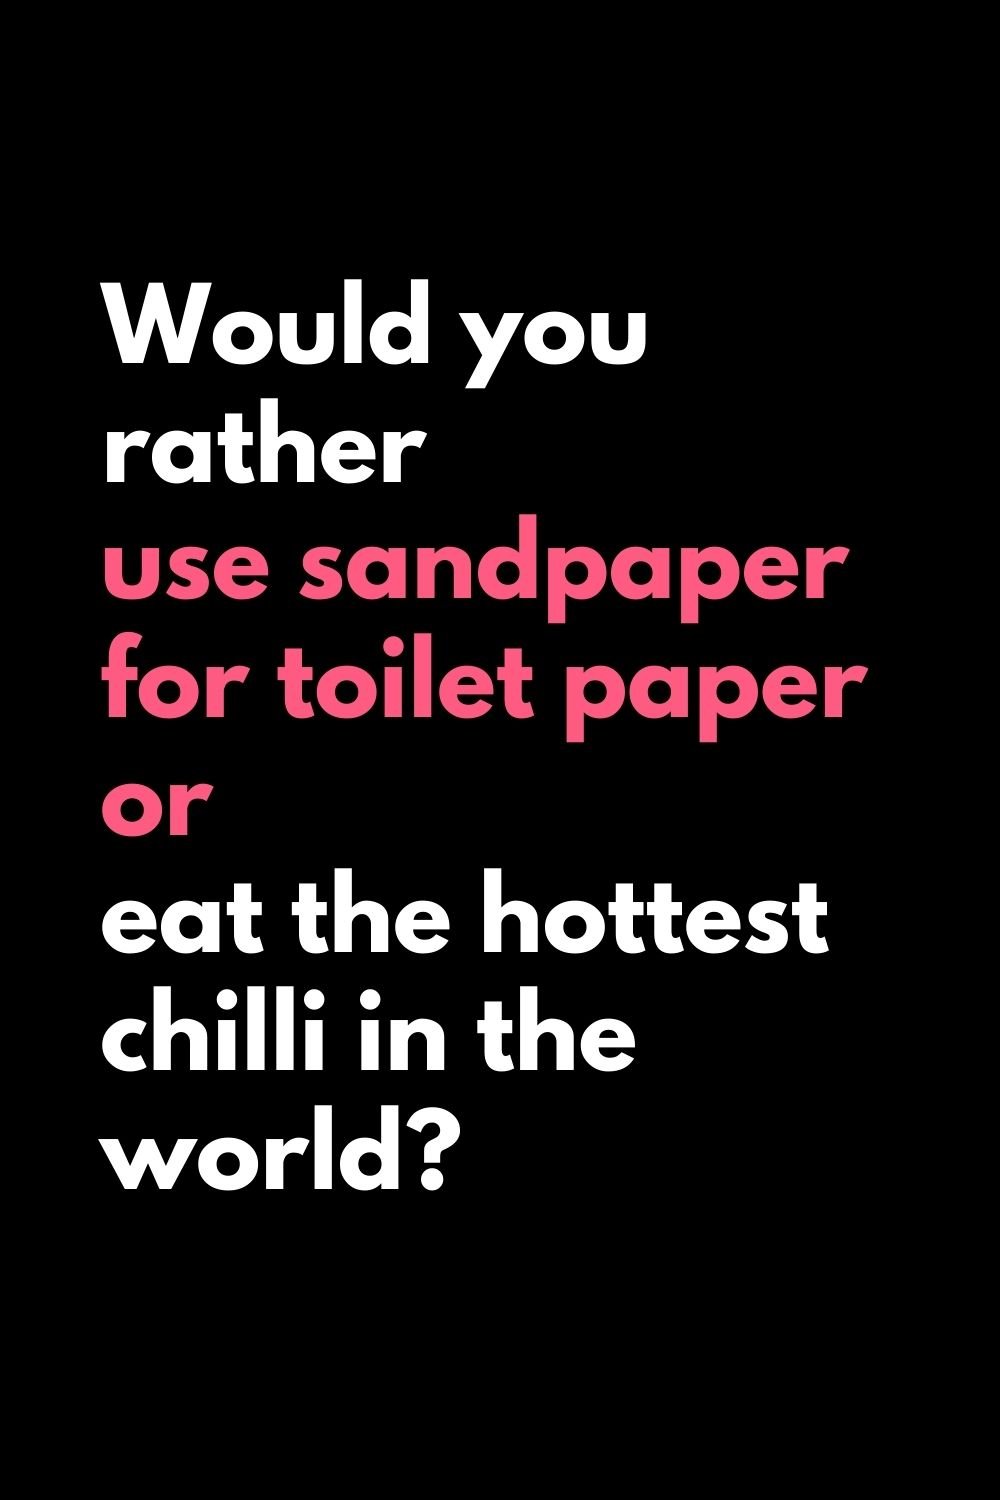 would you rather use sandpaper for toilet paper or eat the hottest chilli in the world